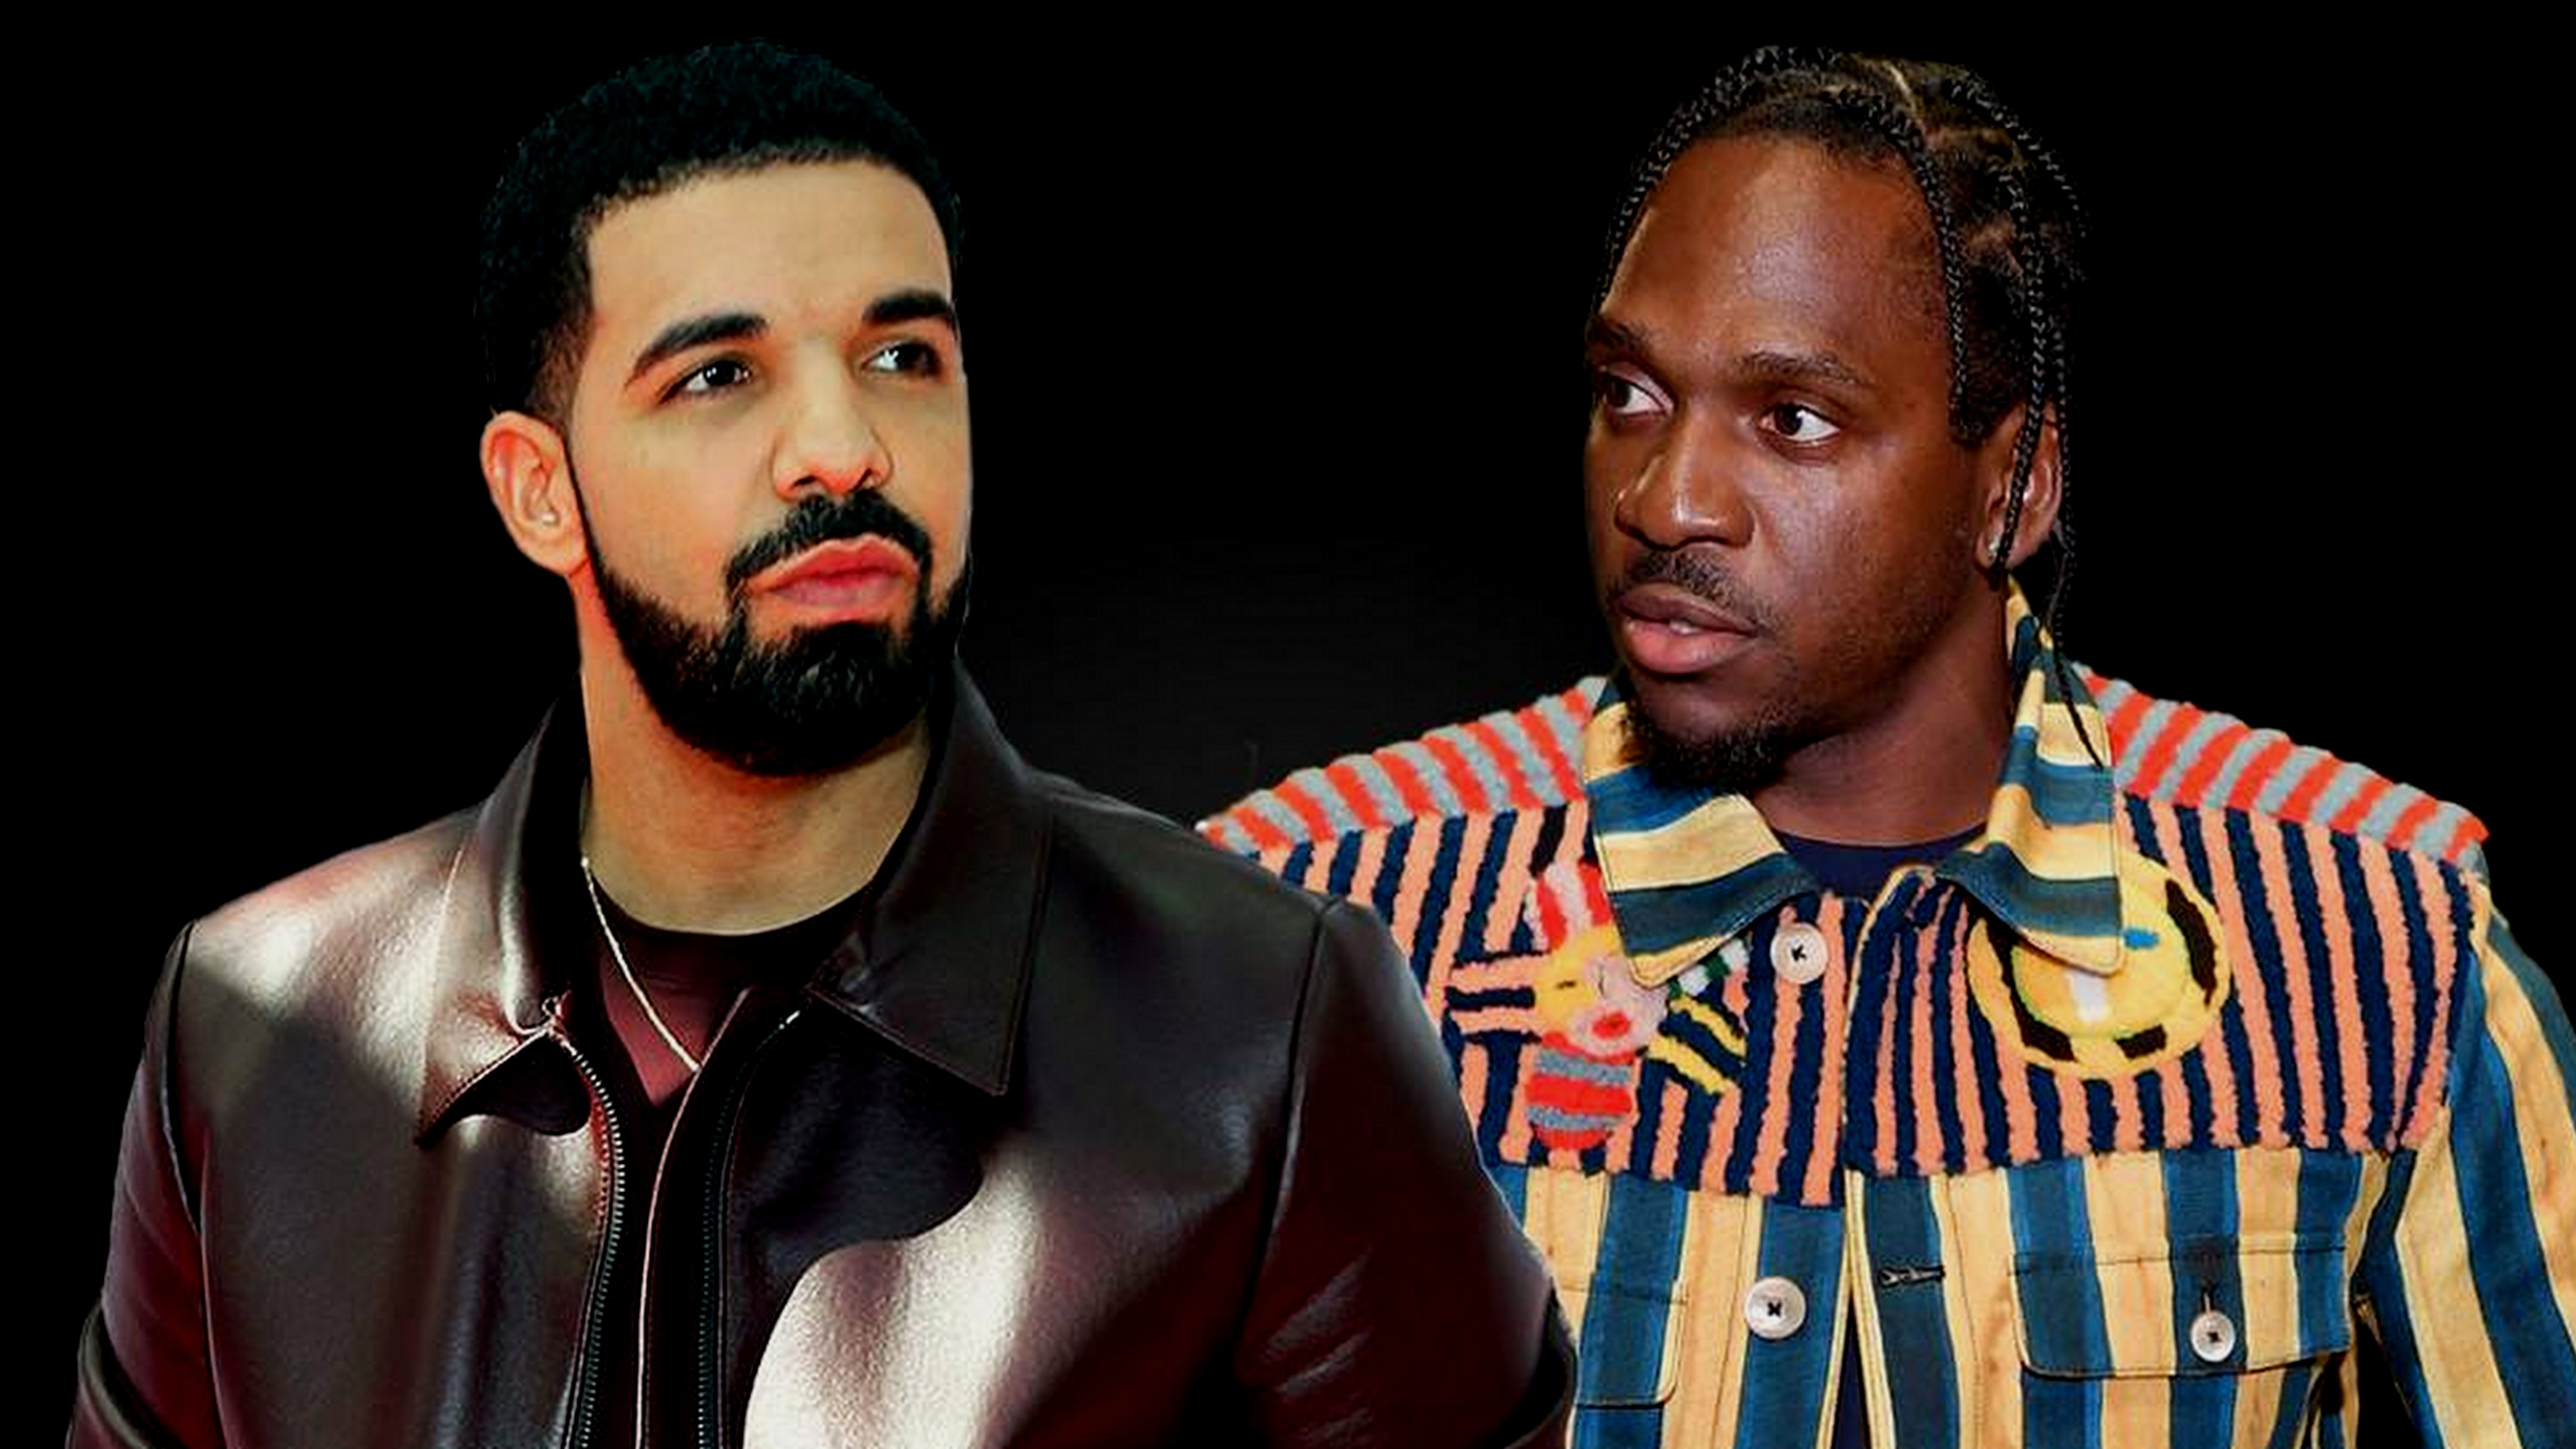 https://www.eonline.com/news/939944/6-savage-lines-from-drake-and-pusha-t-s-current-diss-track-war